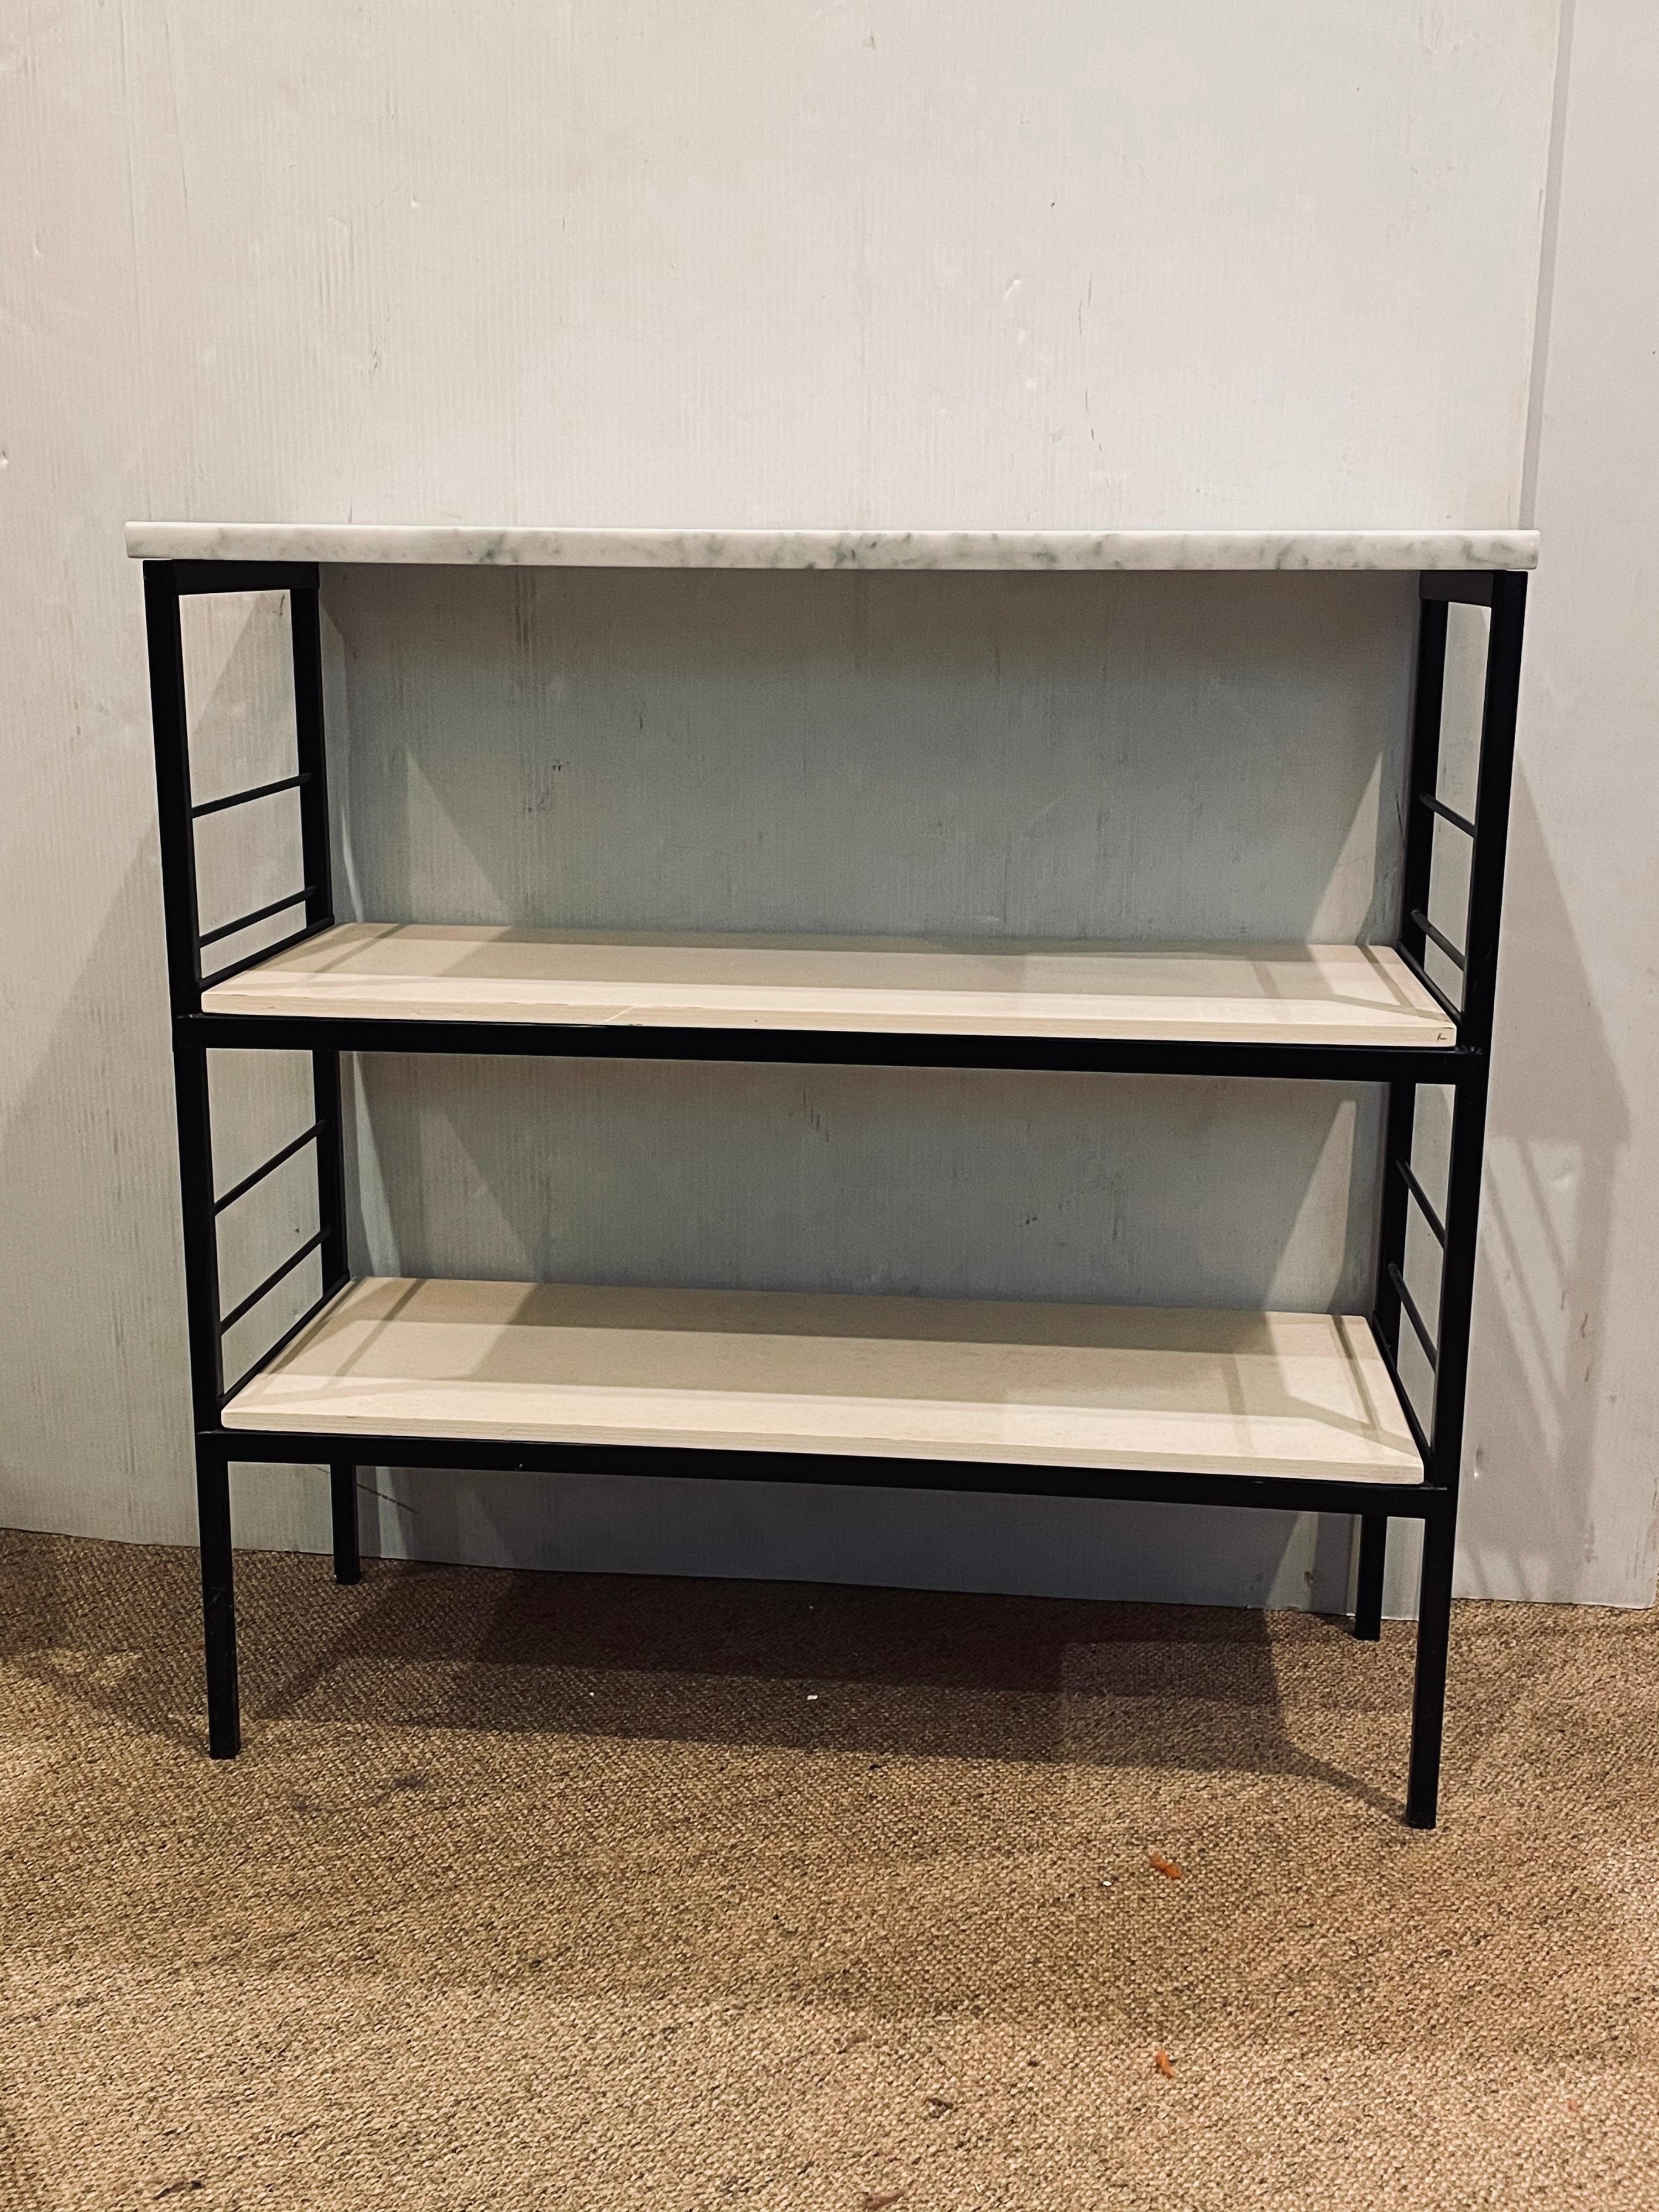 Simple atomic age black enameled metal frame, with wood painted shelves and solid marble top, bookcase made by Vista of California, circa the 1950s, we have resprayed the metal frame replace the top with solid Italian Carrera Marble, and polished